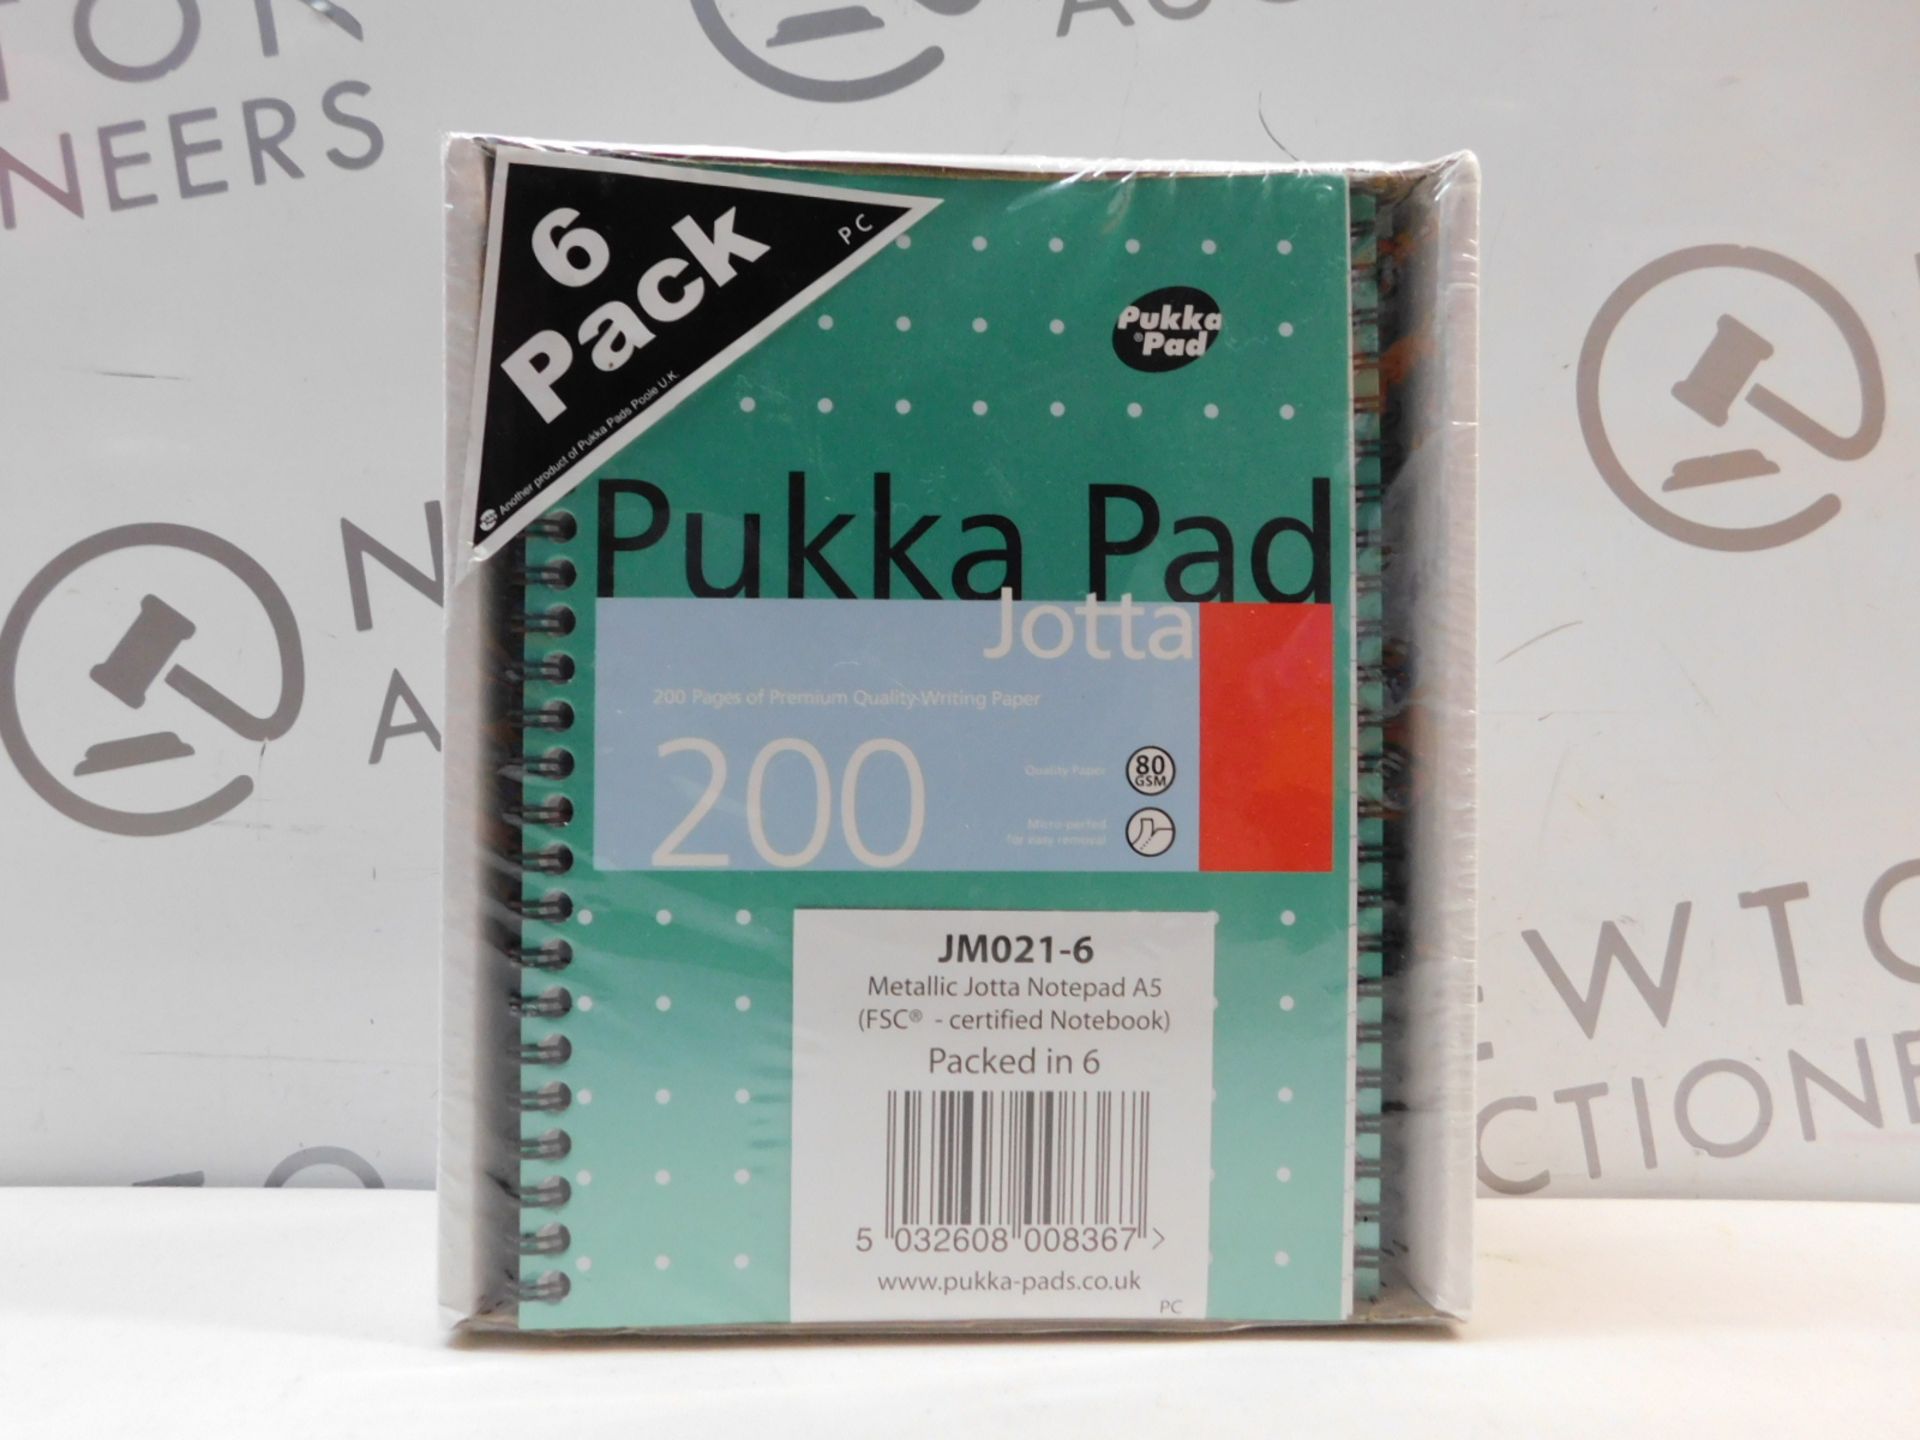 1 BRAND NEW PACK OF 6 PUKKA PAD A5 METALLIC JOTTA NOTEPAD 200 PAGES RRP £12.99